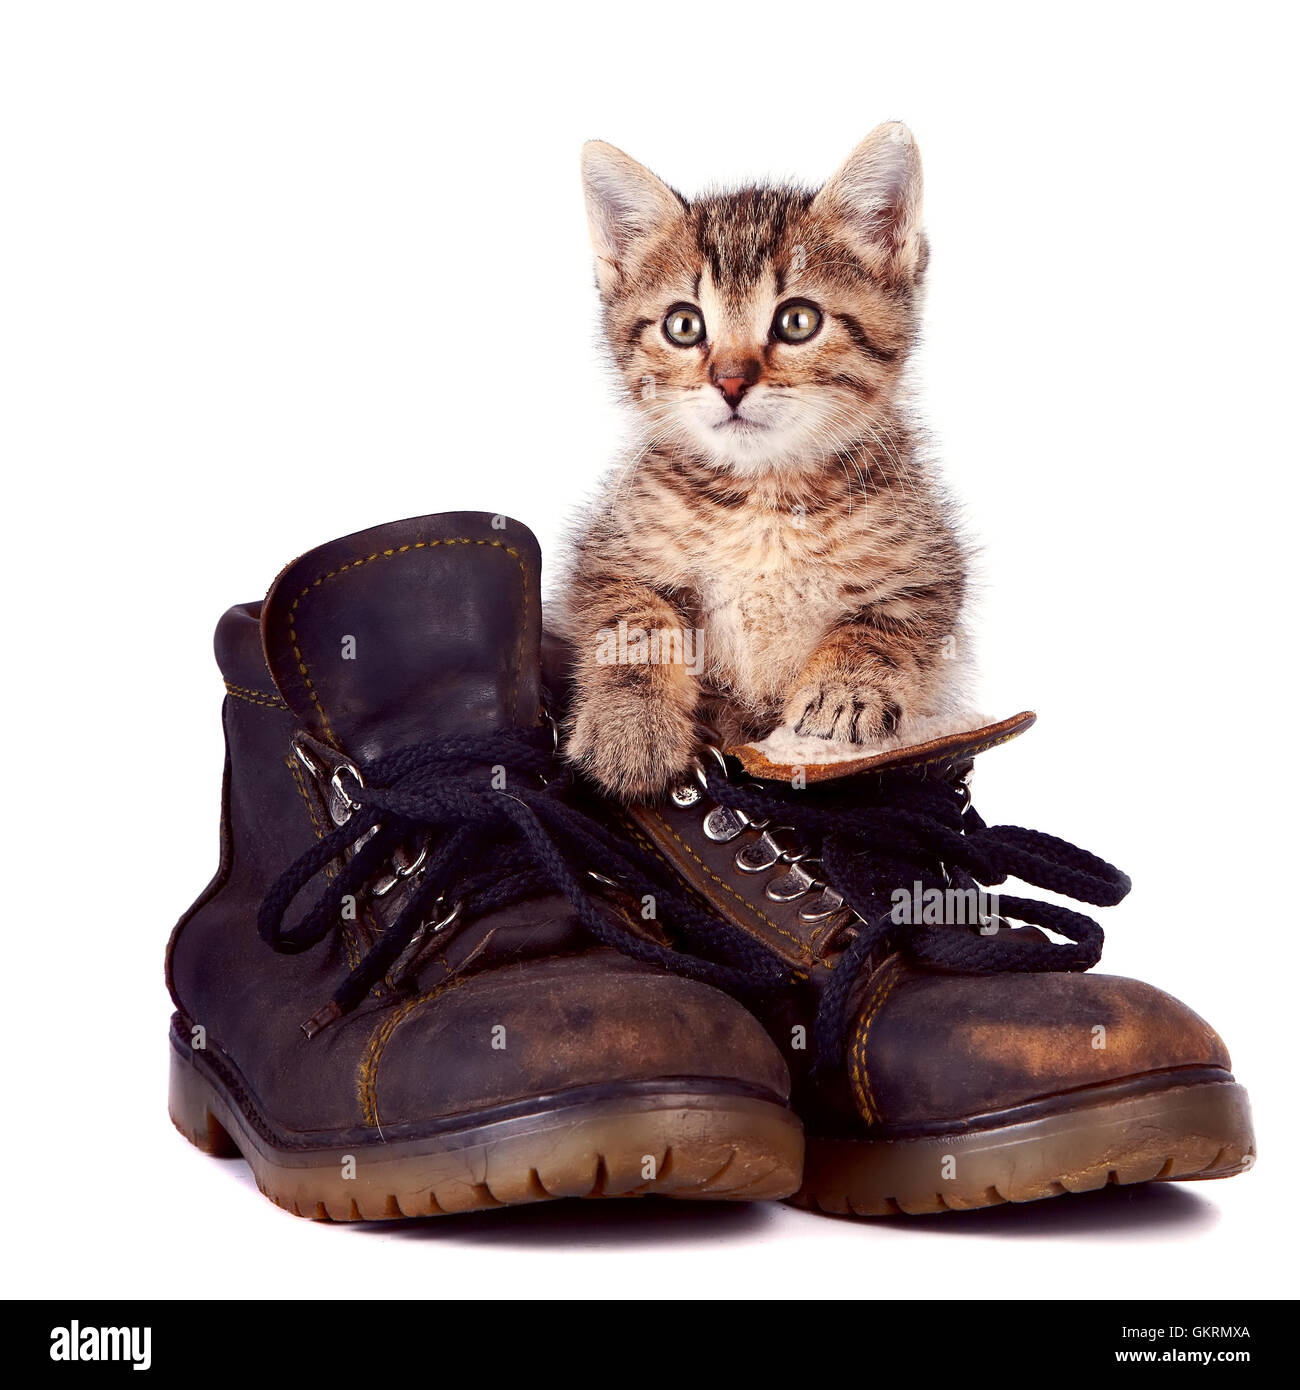 Kitten and boots Stock Photo - Alamy